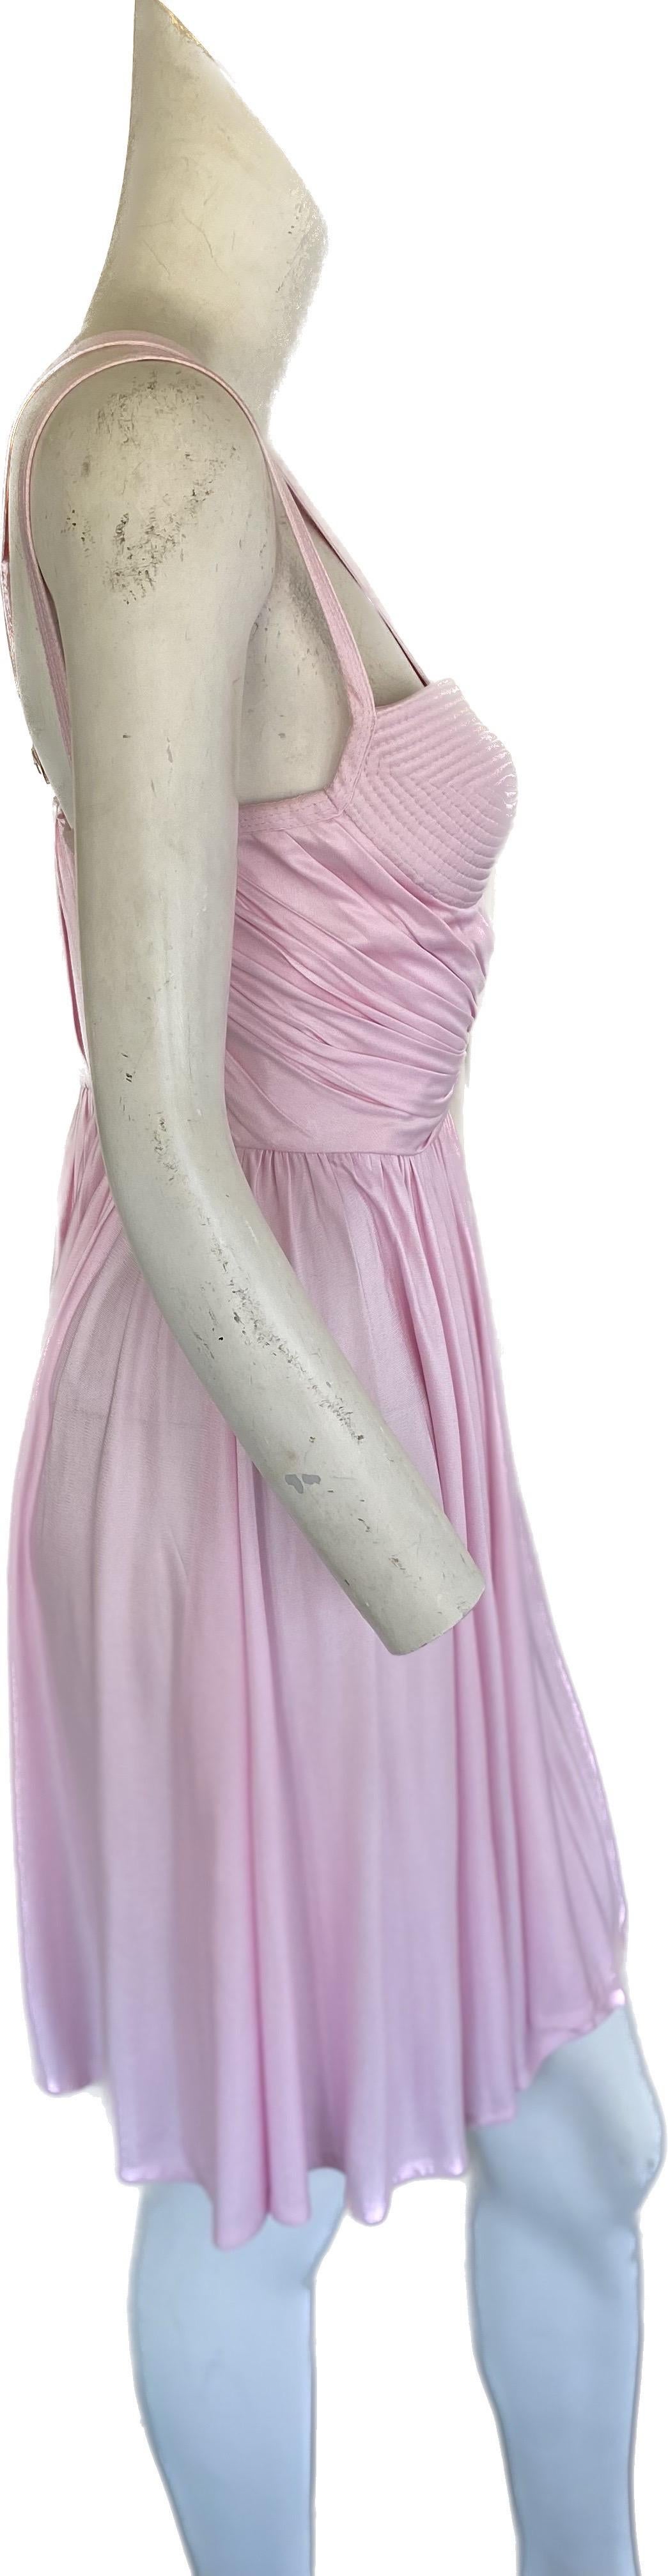 Vintage Gianni Versace Couture 1995 Lilac Jersey Runway Dress w/ Medusa Closures 6